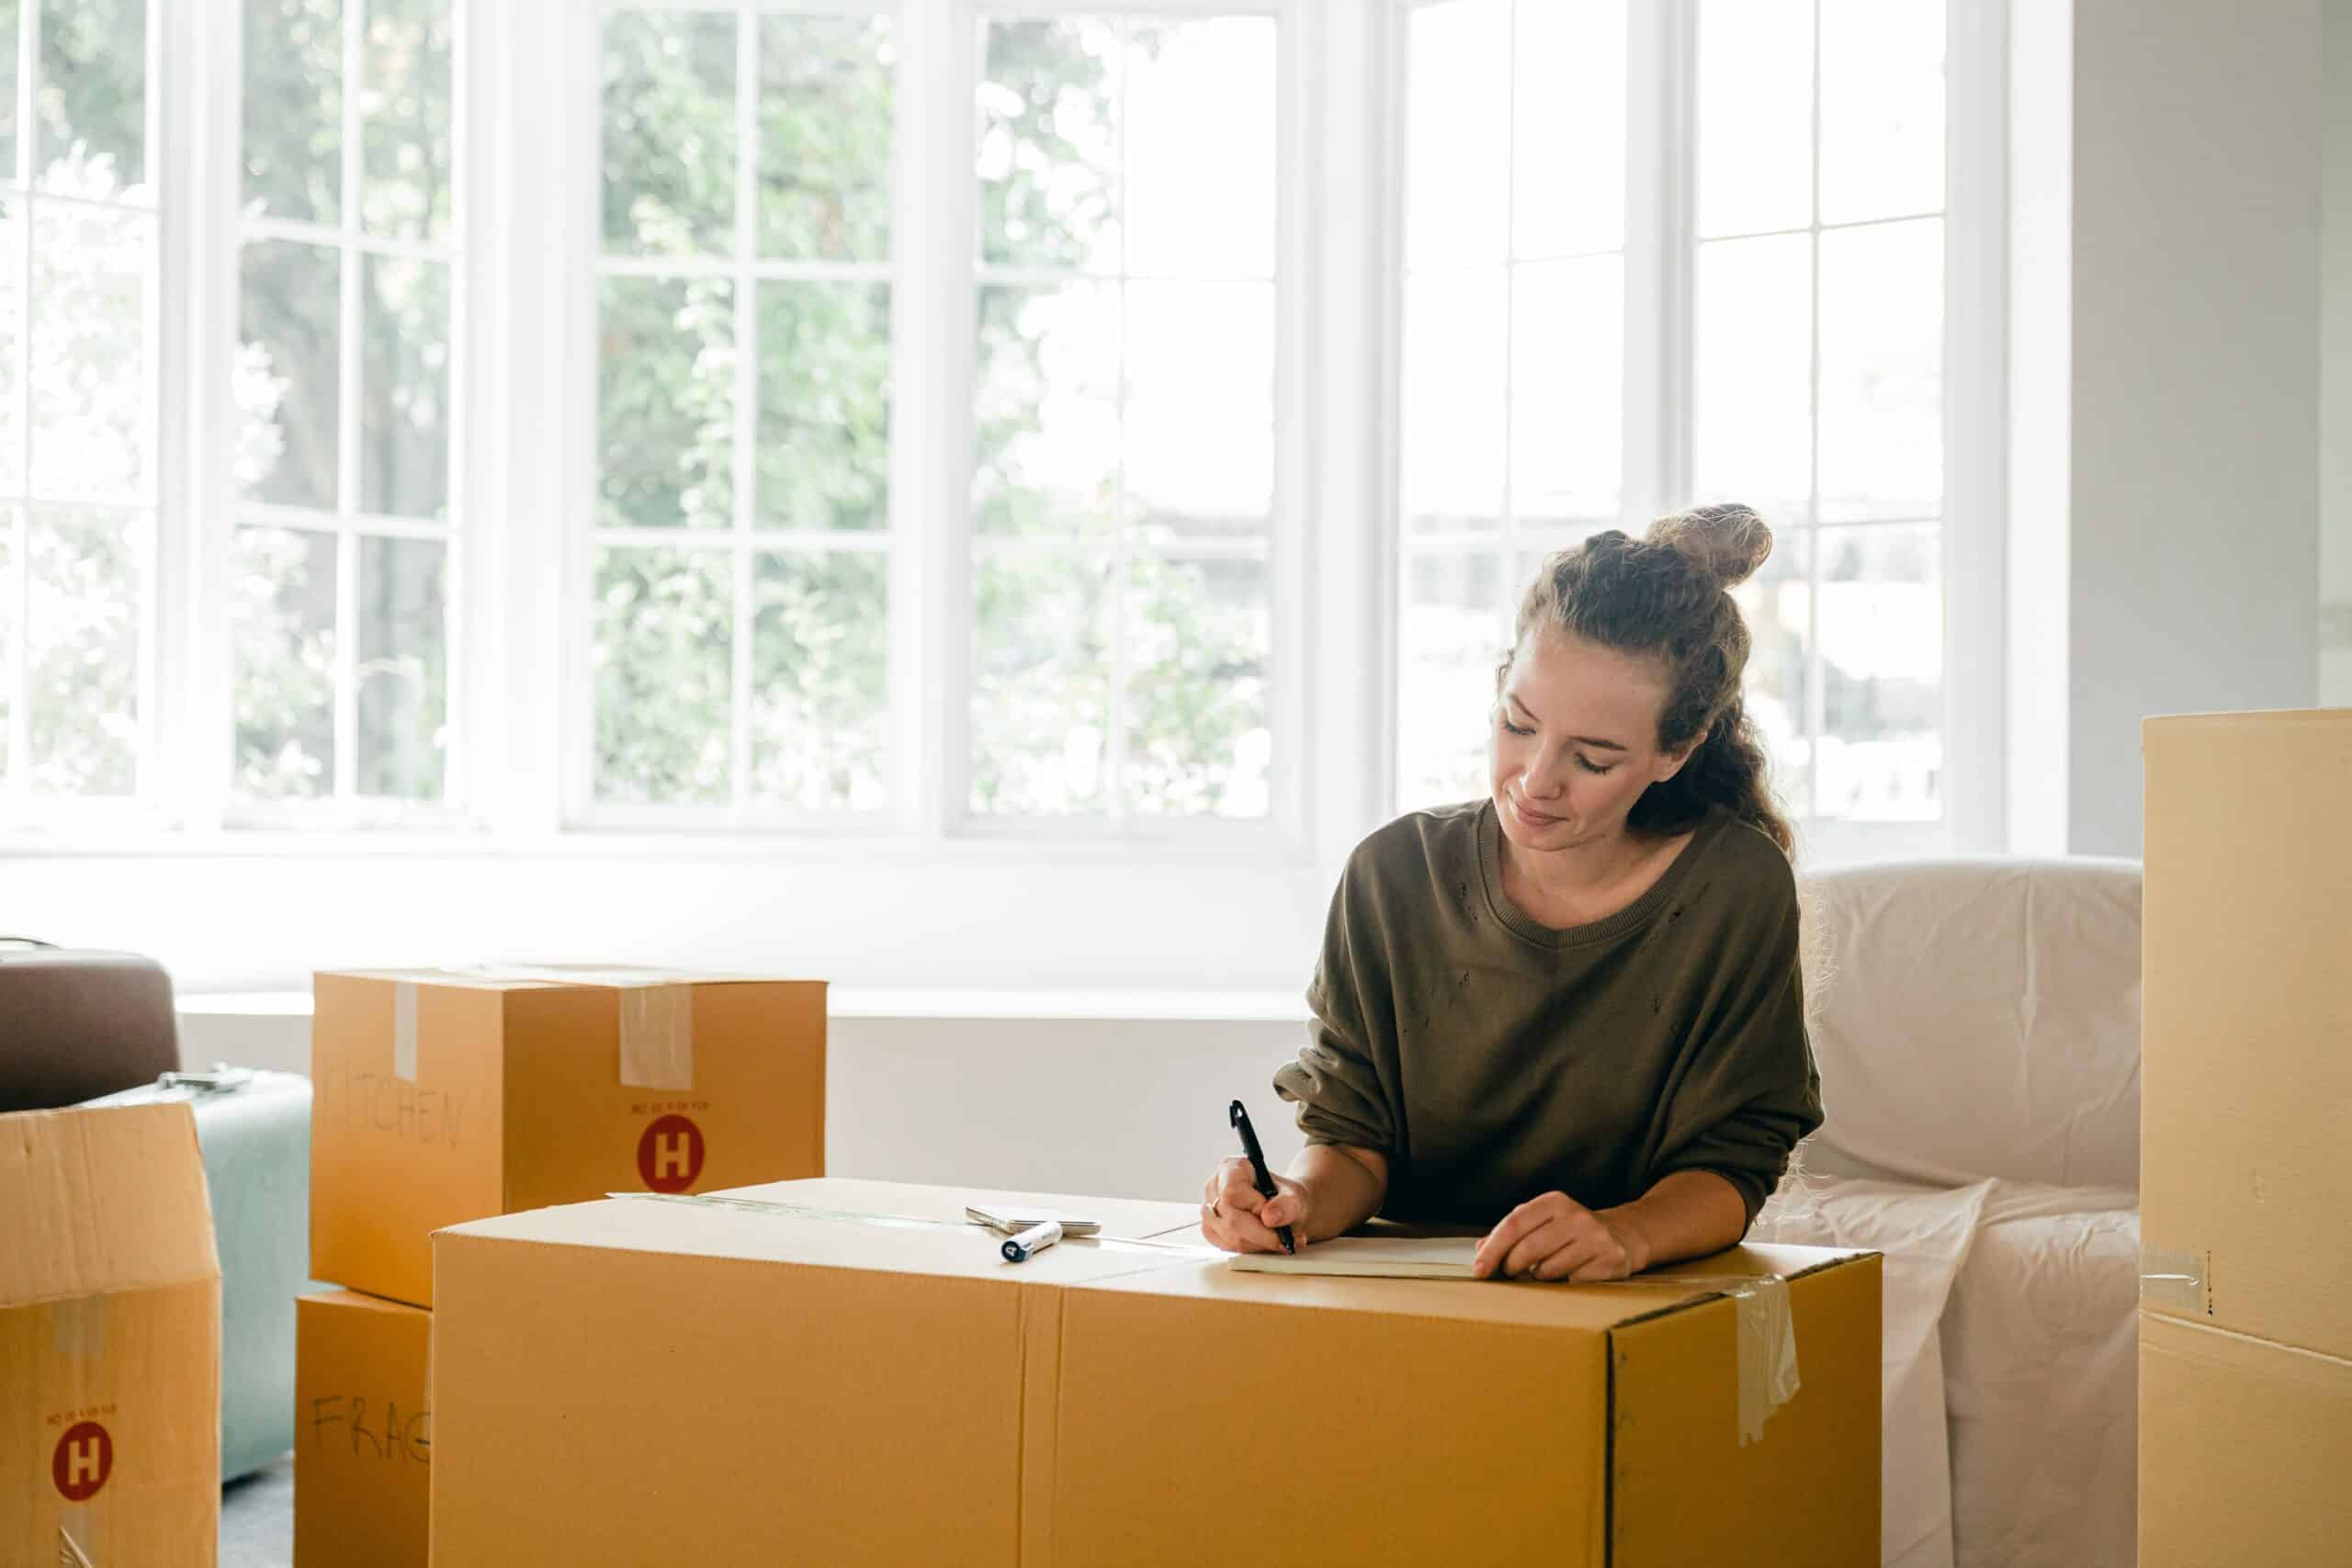 Woman writing on notepad surrounded by moving boxes.